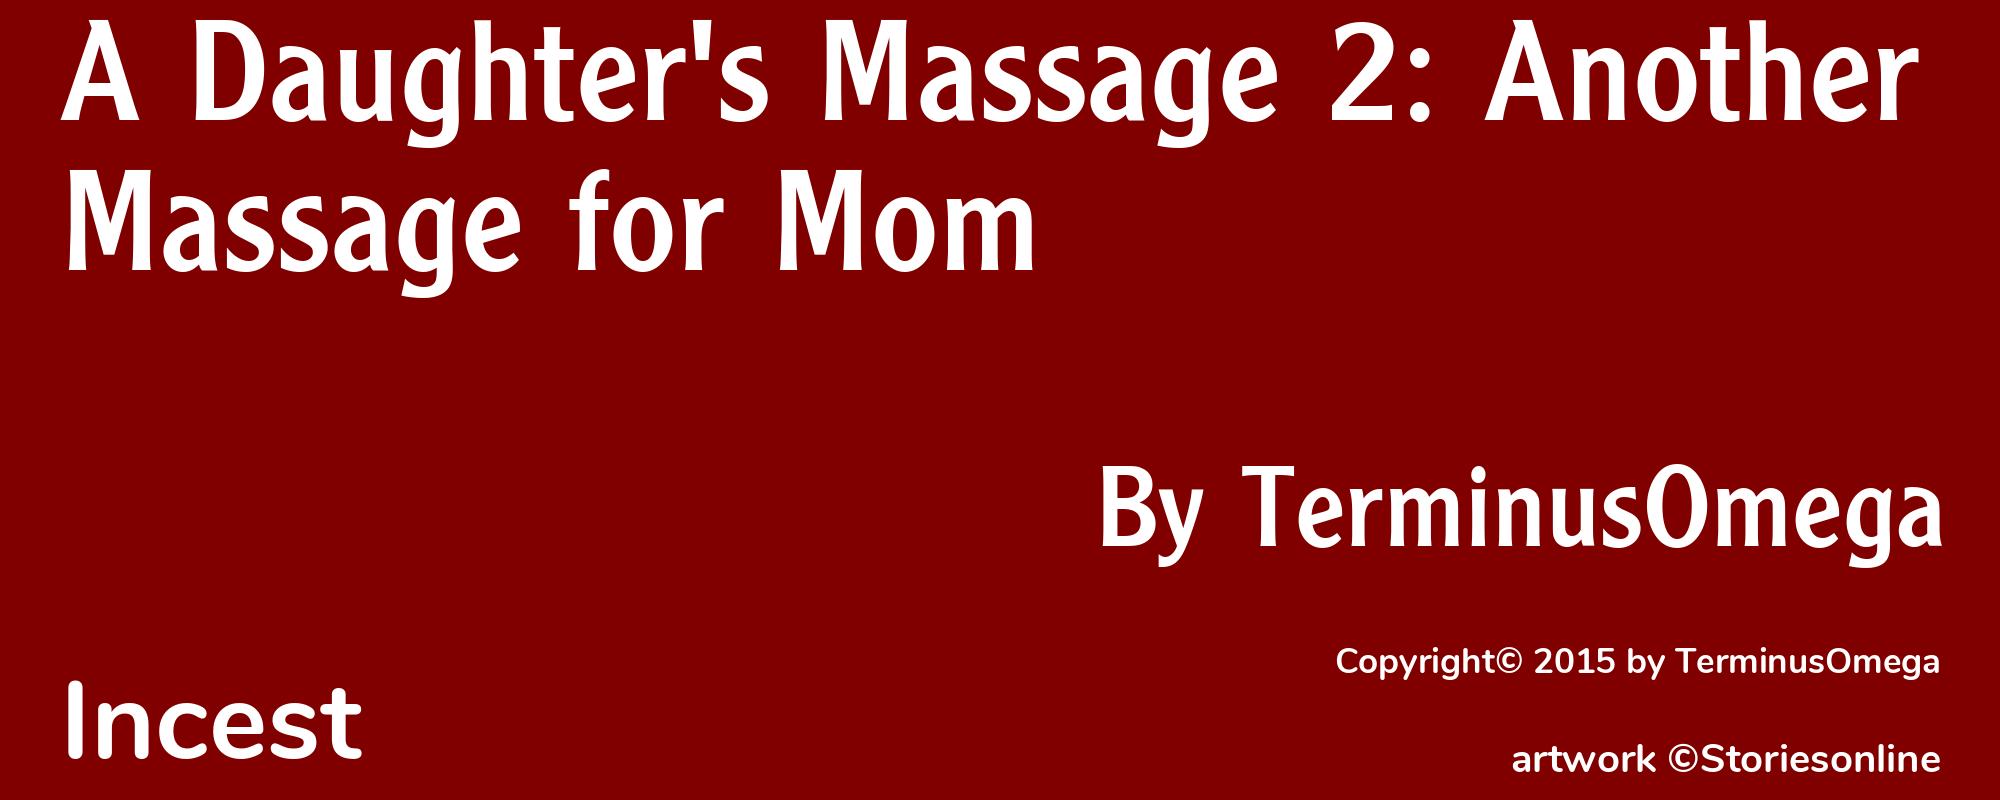 A Daughter's Massage 2: Another Massage for Mom - Cover